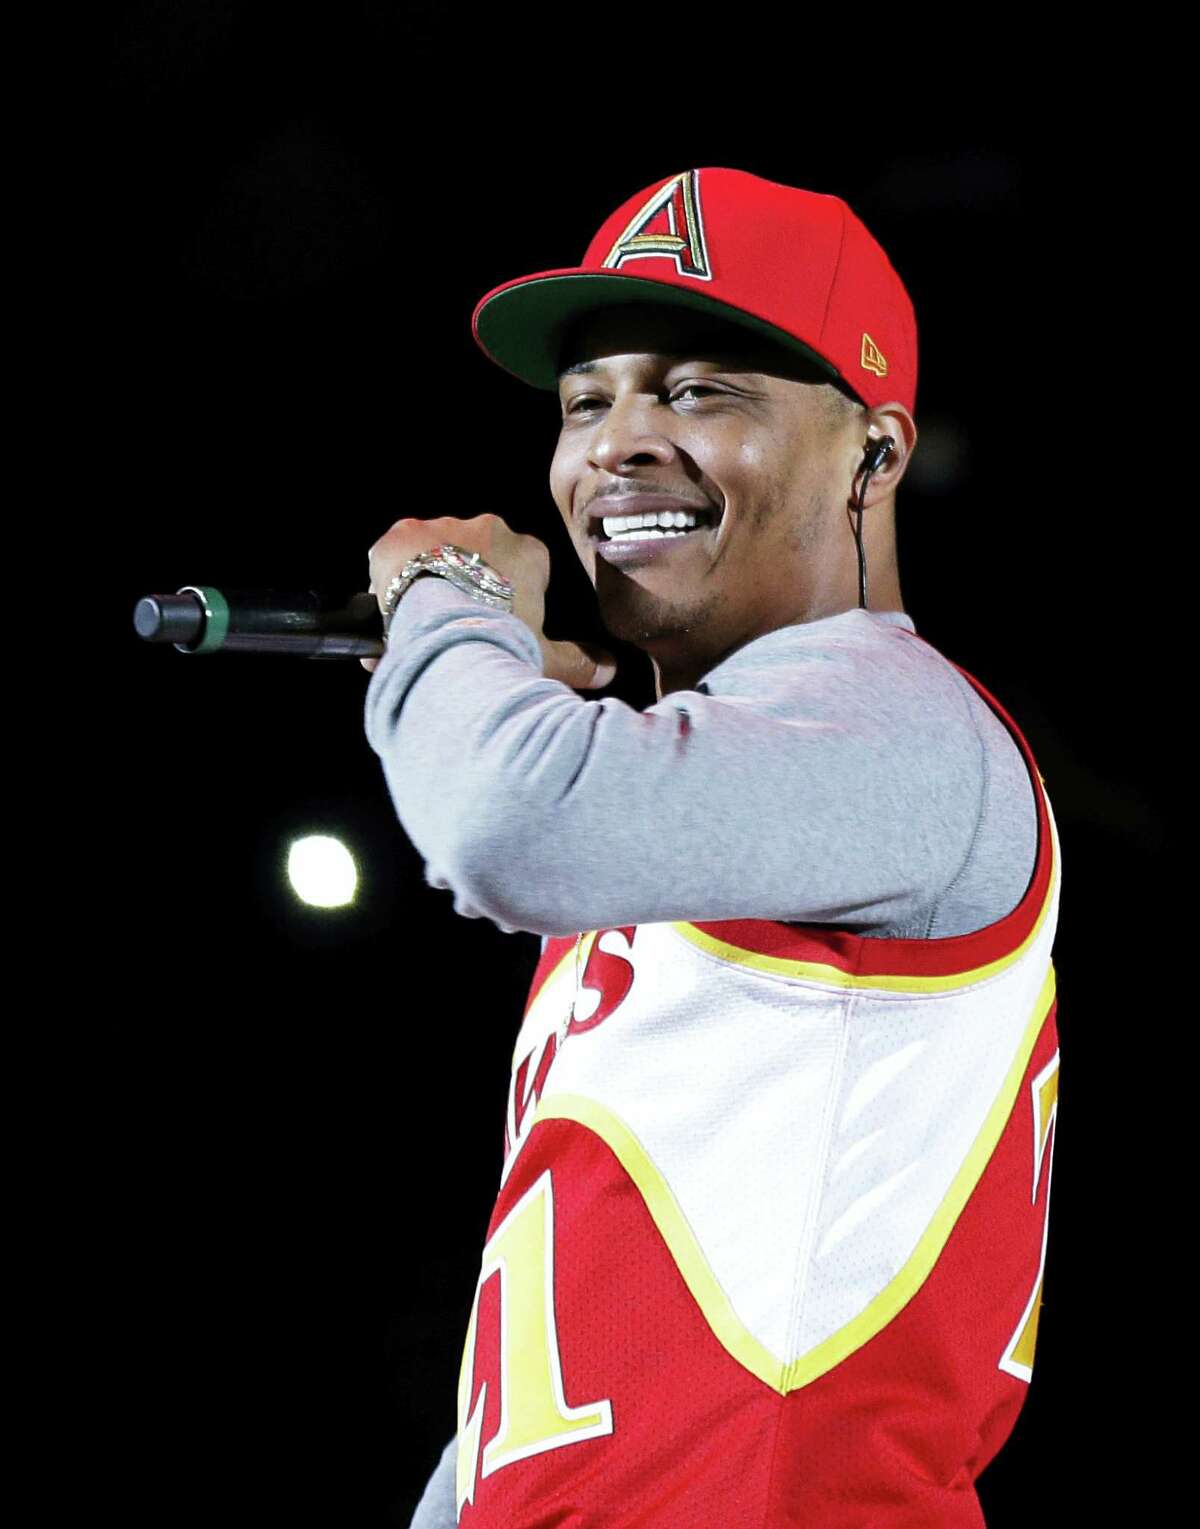 Rapper T.I. performs before the start of a game between the Indiana Pacers and the Atlanta Hawks in Atlanta. The Hawks are collaborating with big-name hip-hop artists like T.I., Ludacris and Big Boi in what the team calls an effort to make amends after it was revealed two officials made racially charged remarks in separate incidents.